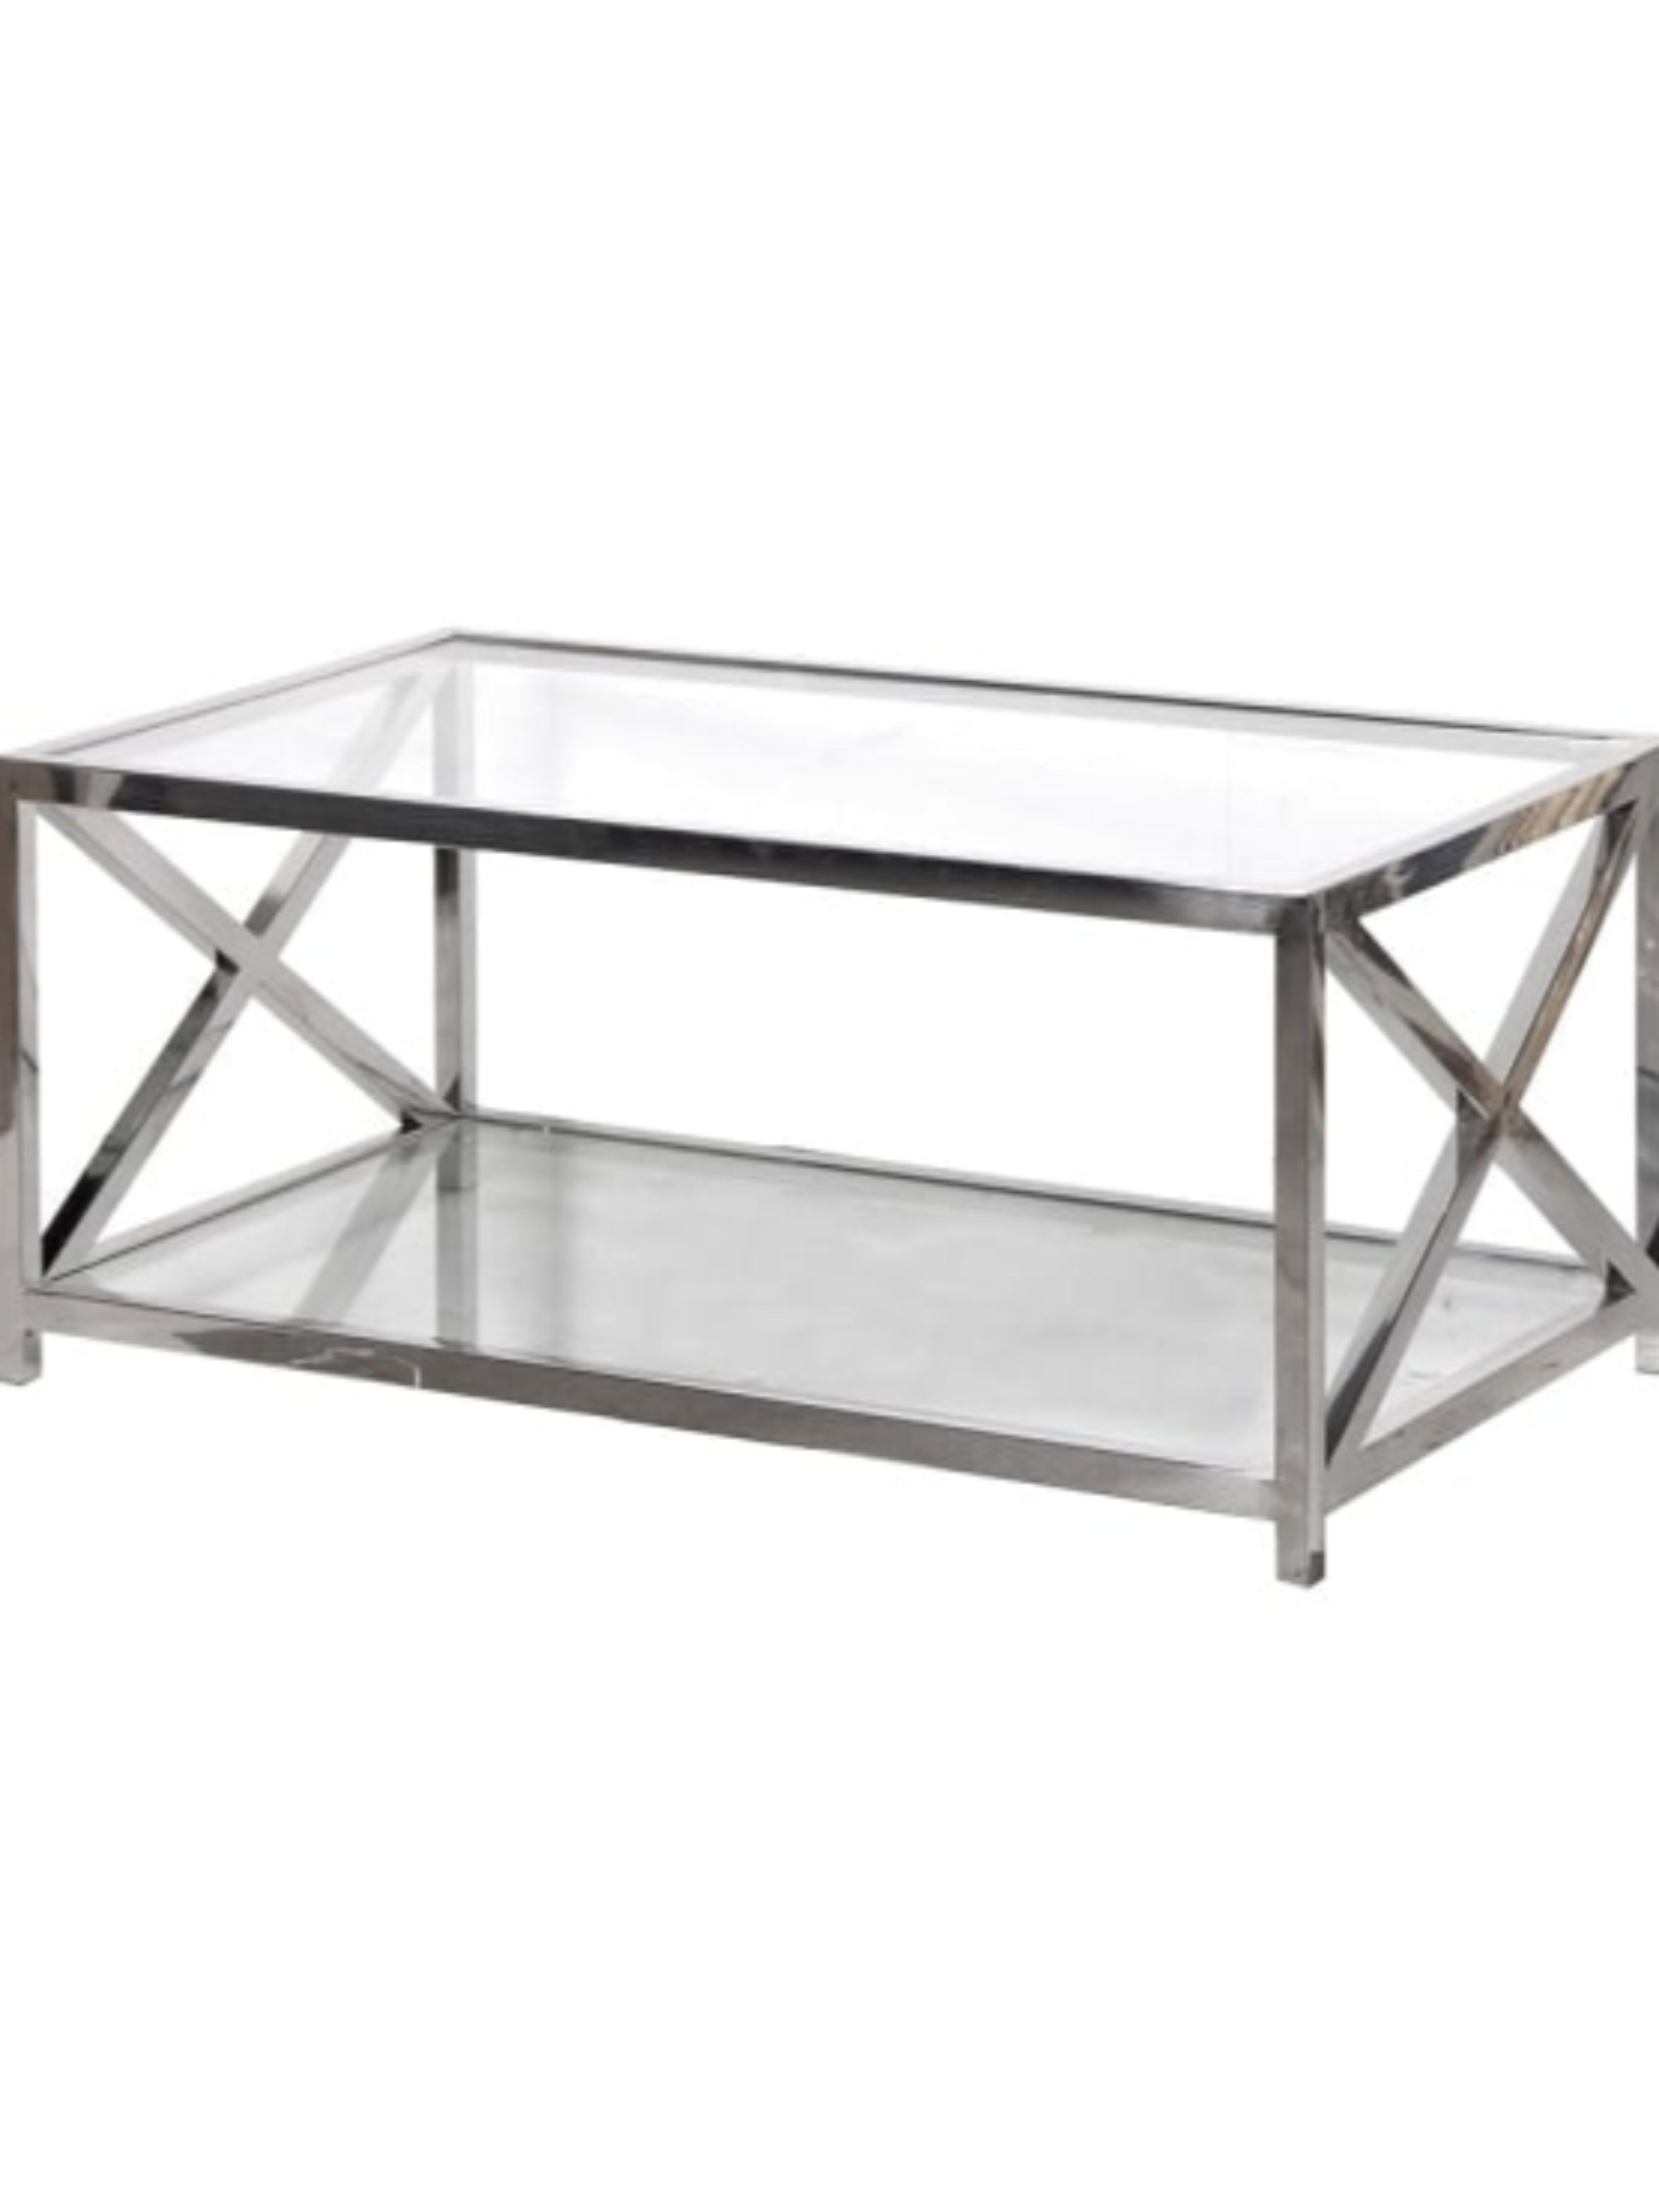 Two Tiered Glass and Steel Coffee Table